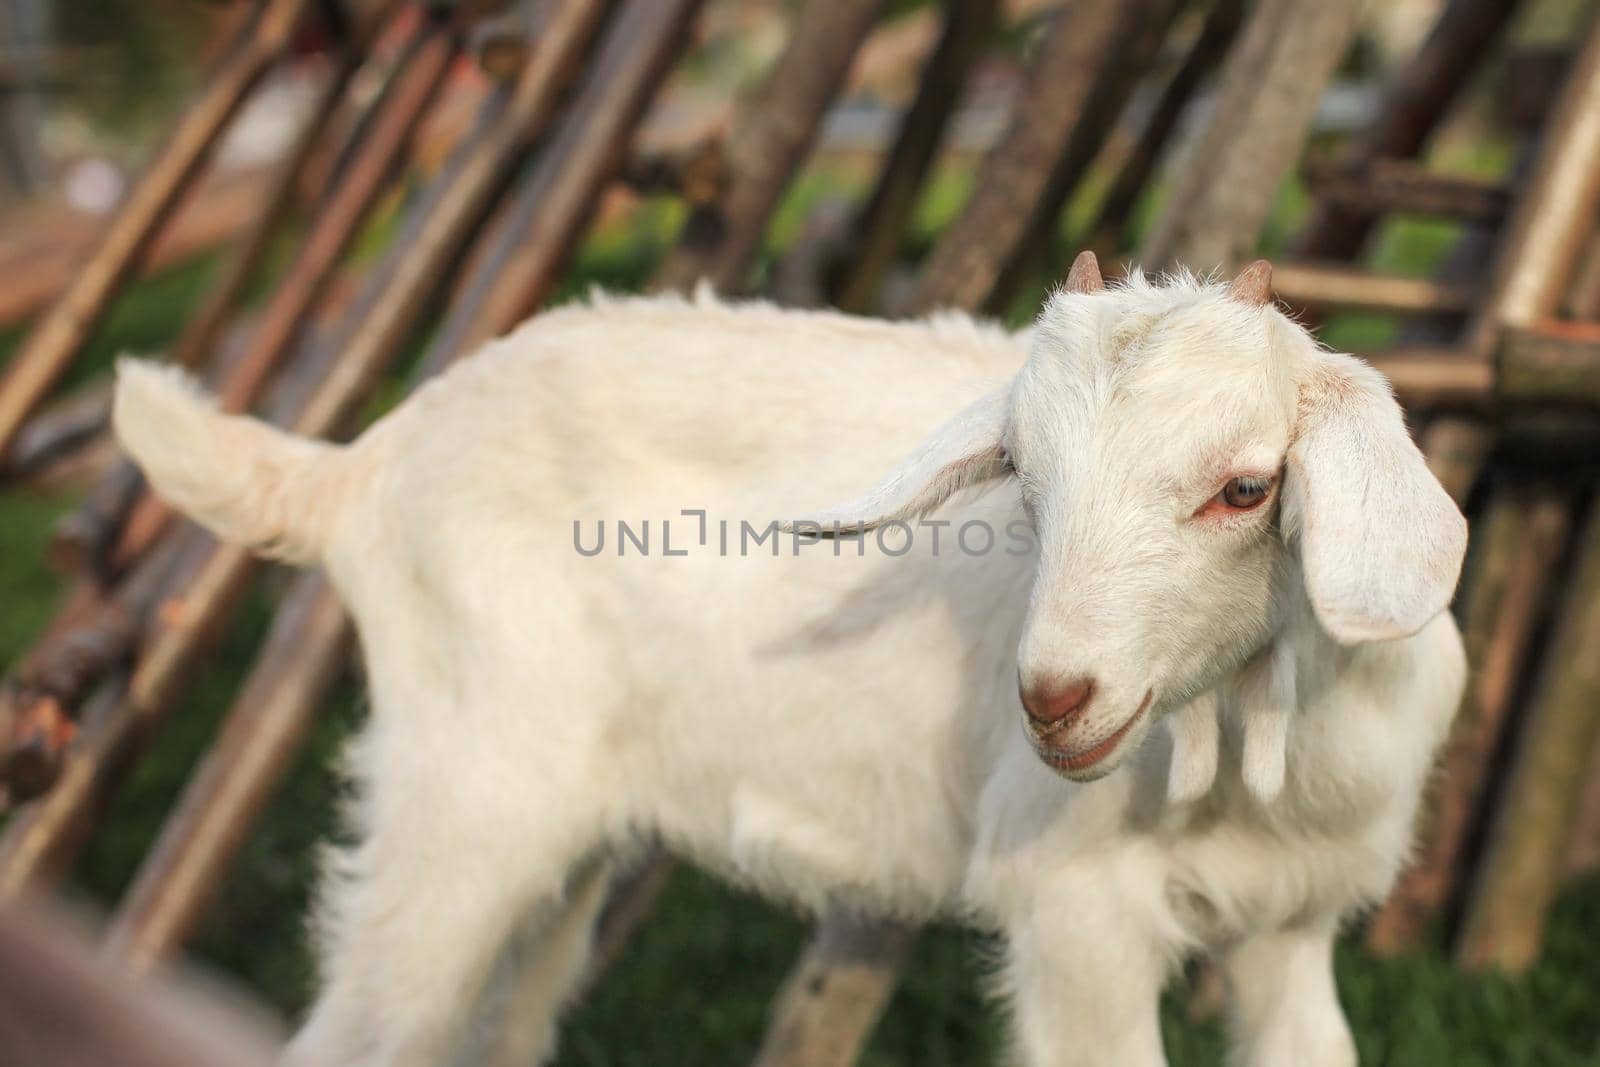 Baby goat kid with blurred hay stacks behind.